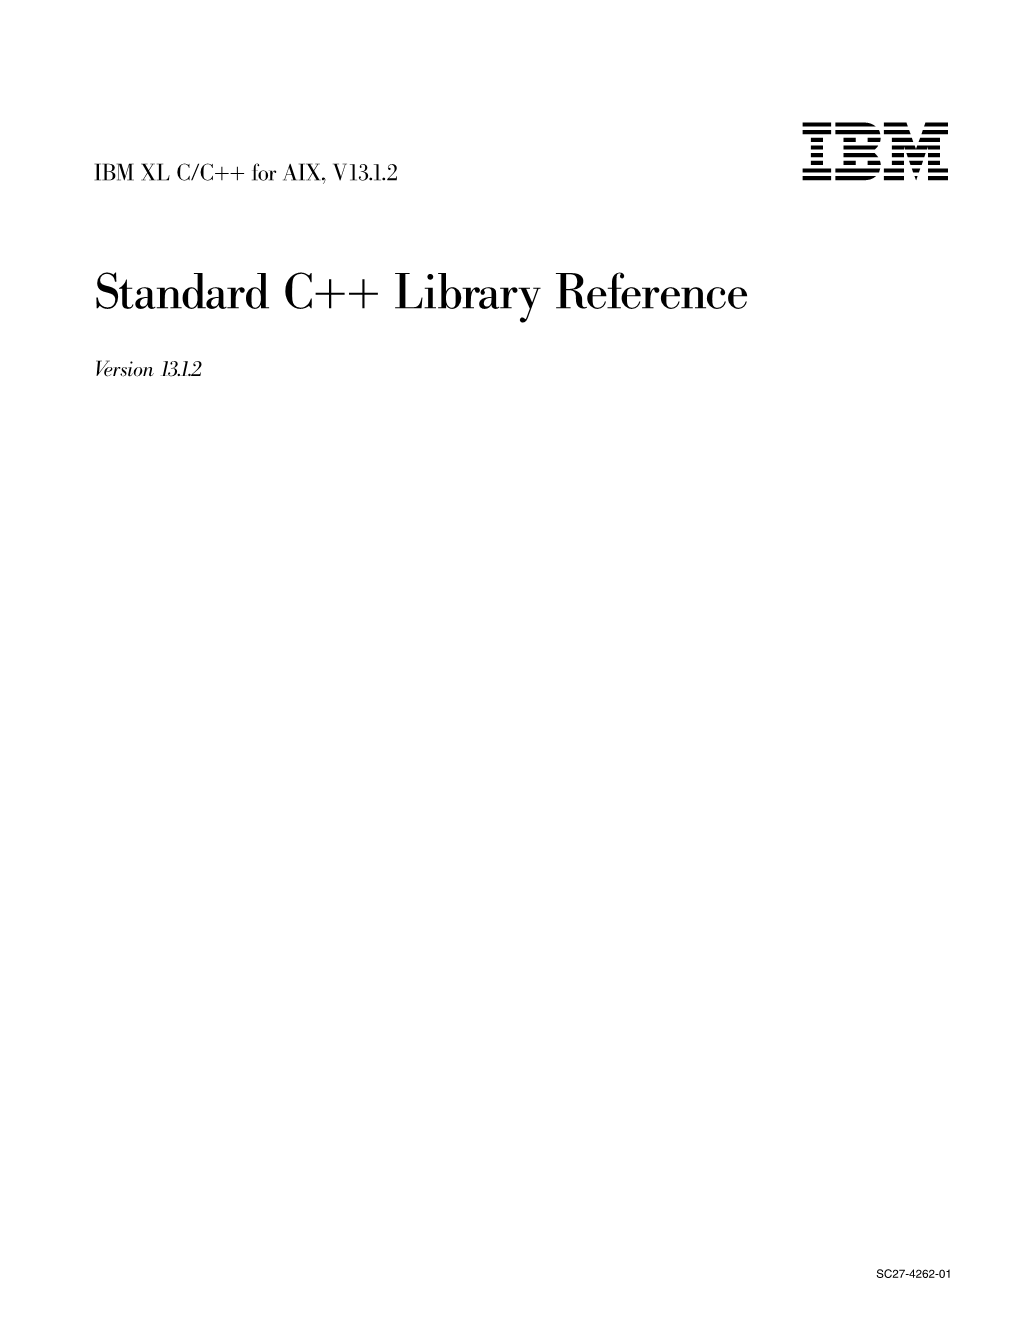 Standard C++ Library Reference